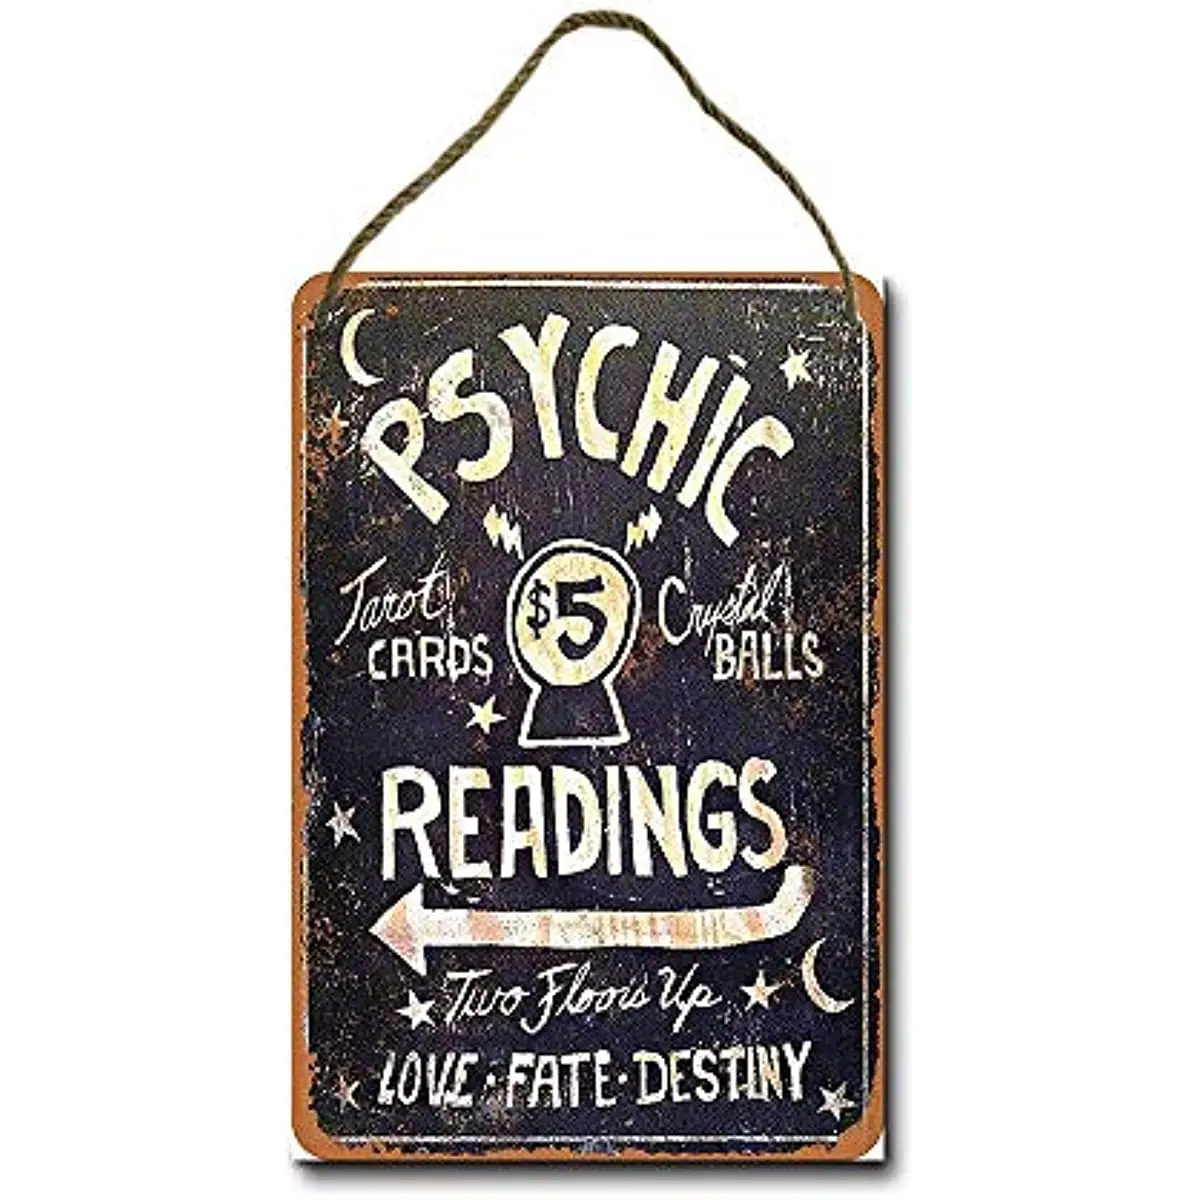 Psychic Readings $5 Tarot Cards Crystal Balls Hanging Sign Decor Home Decor Wood Sign Plaque 12" x 6" Hanging Wall Art